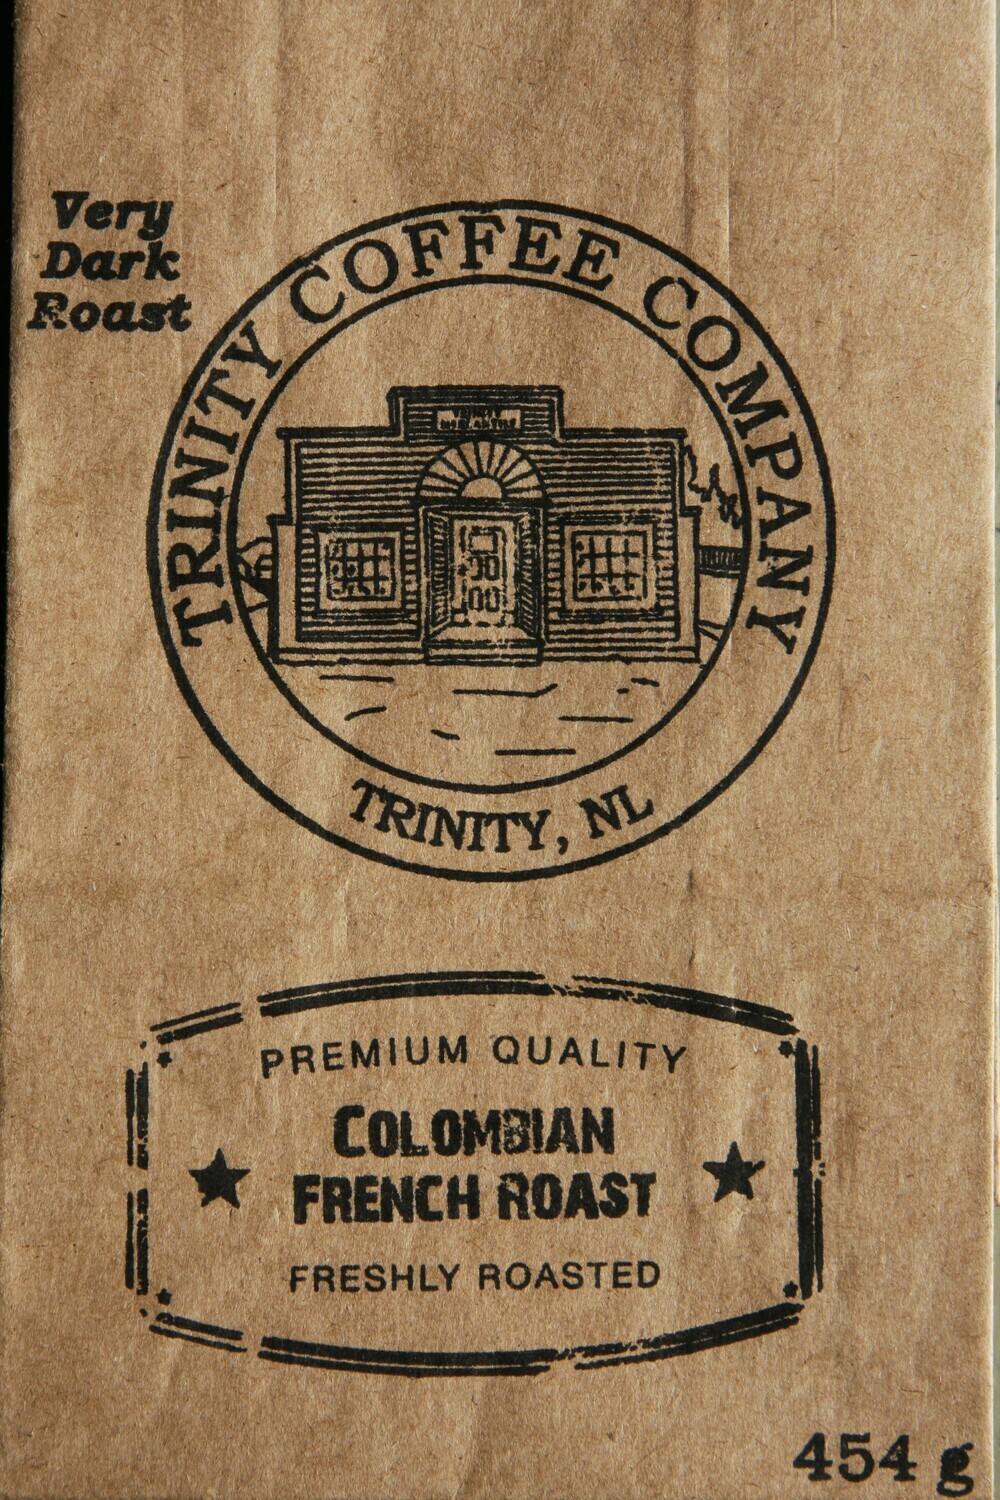 1LB- Colombian French Roast